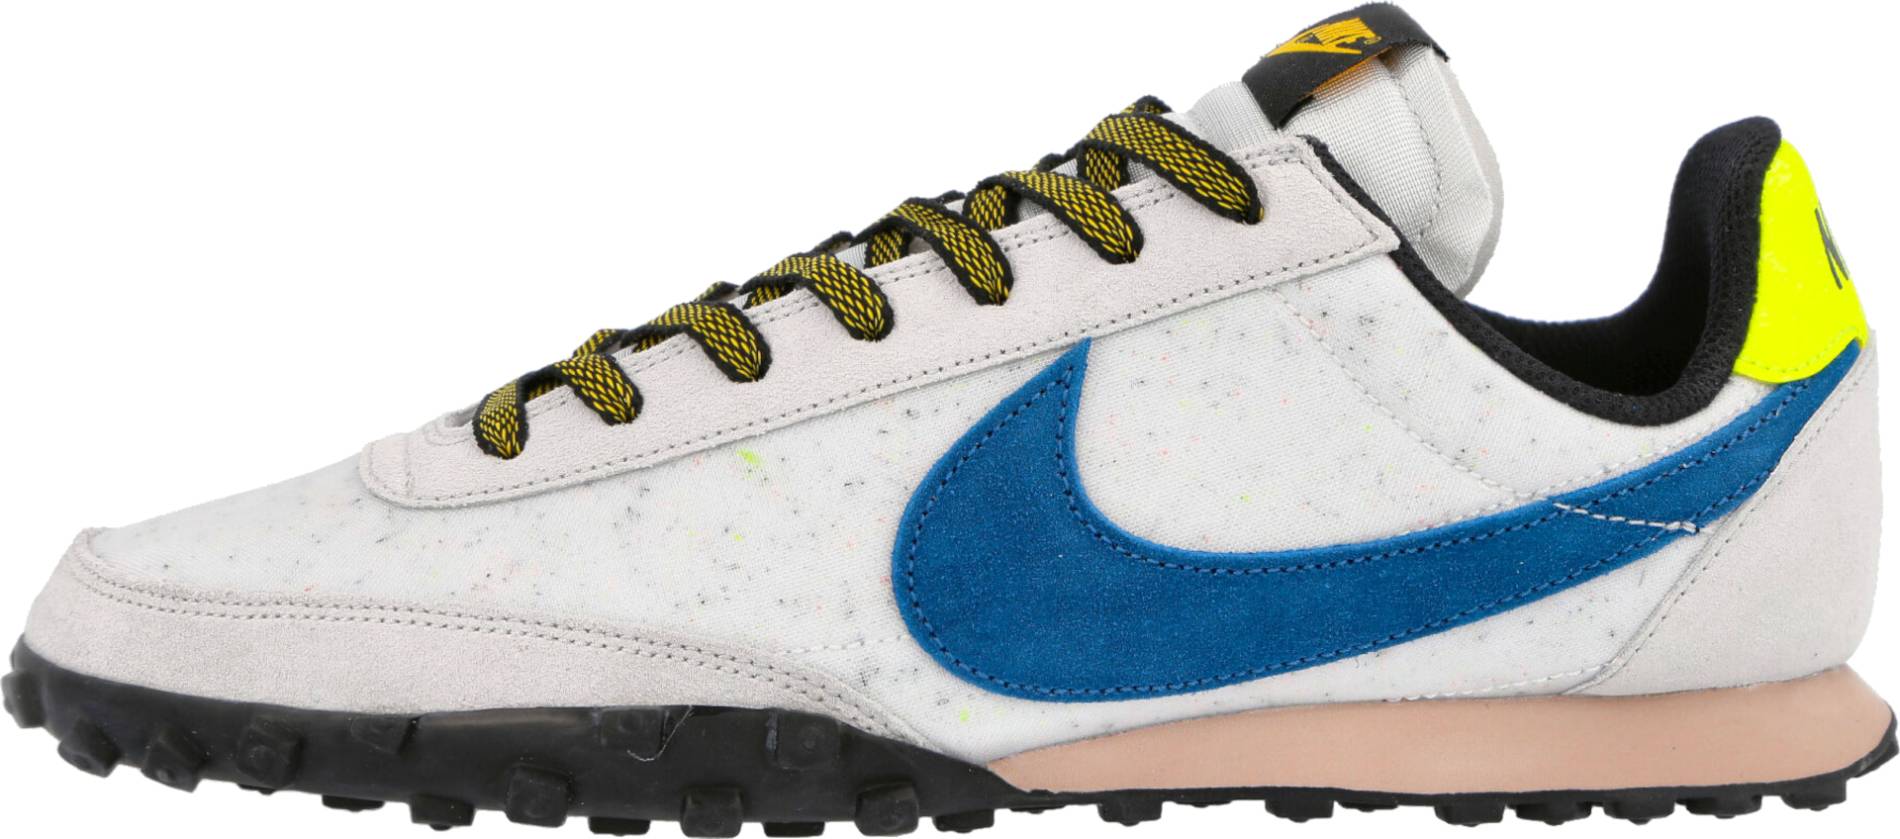 Nike mens nike waffle 1 Waffle Racer sneakers in 5 colors (only $30) | RunRepeat